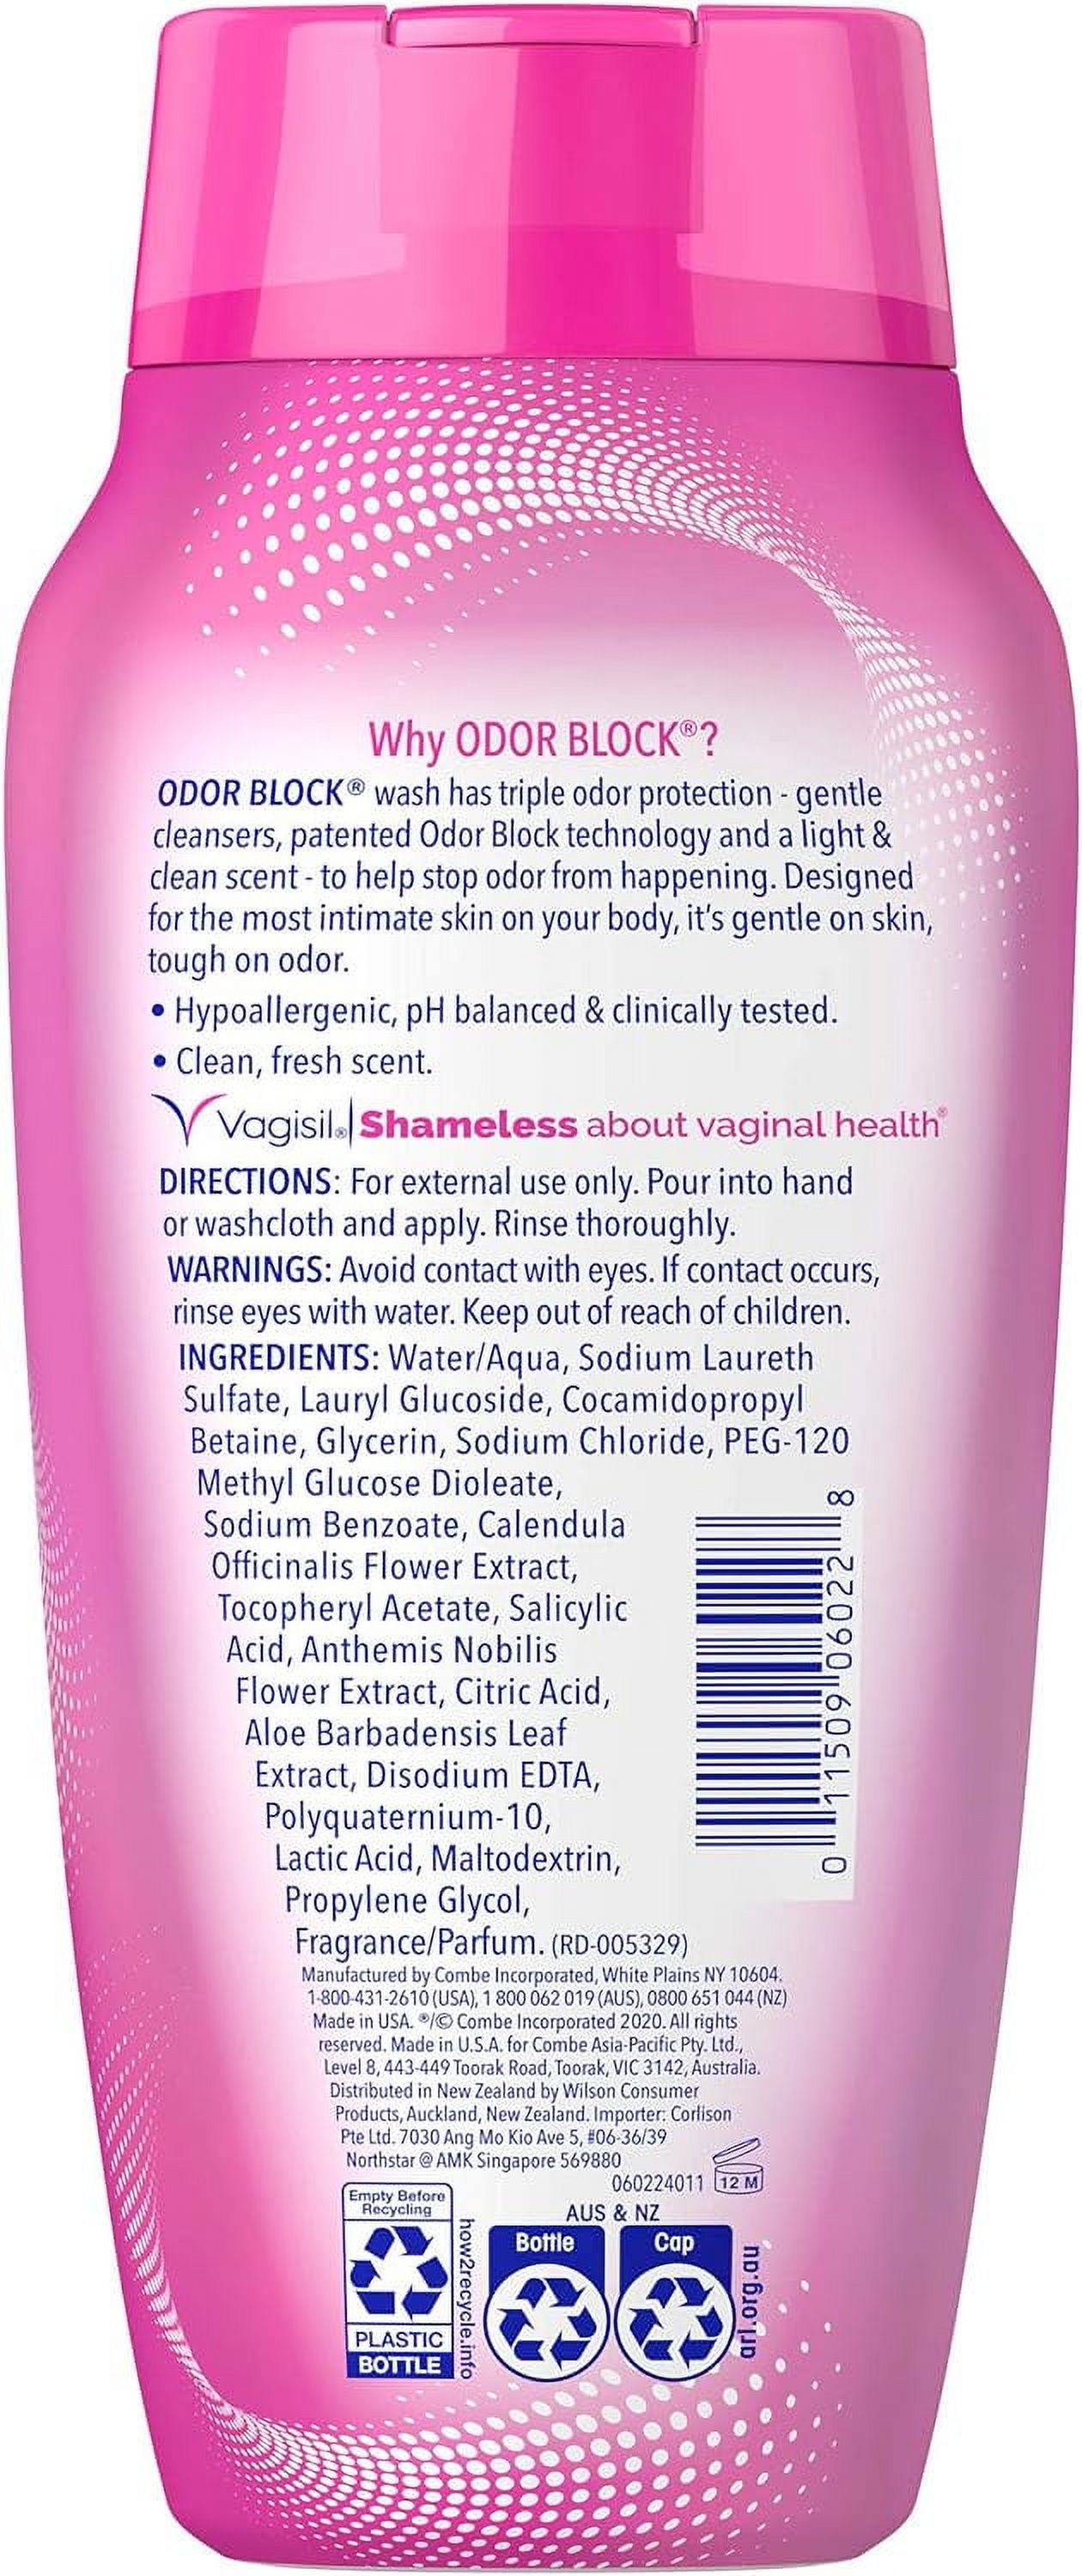 Vagisil Odor Block Daily Intimate Vaginal Feminine Wash, 12 Ounce, 3 pack - image 2 of 8